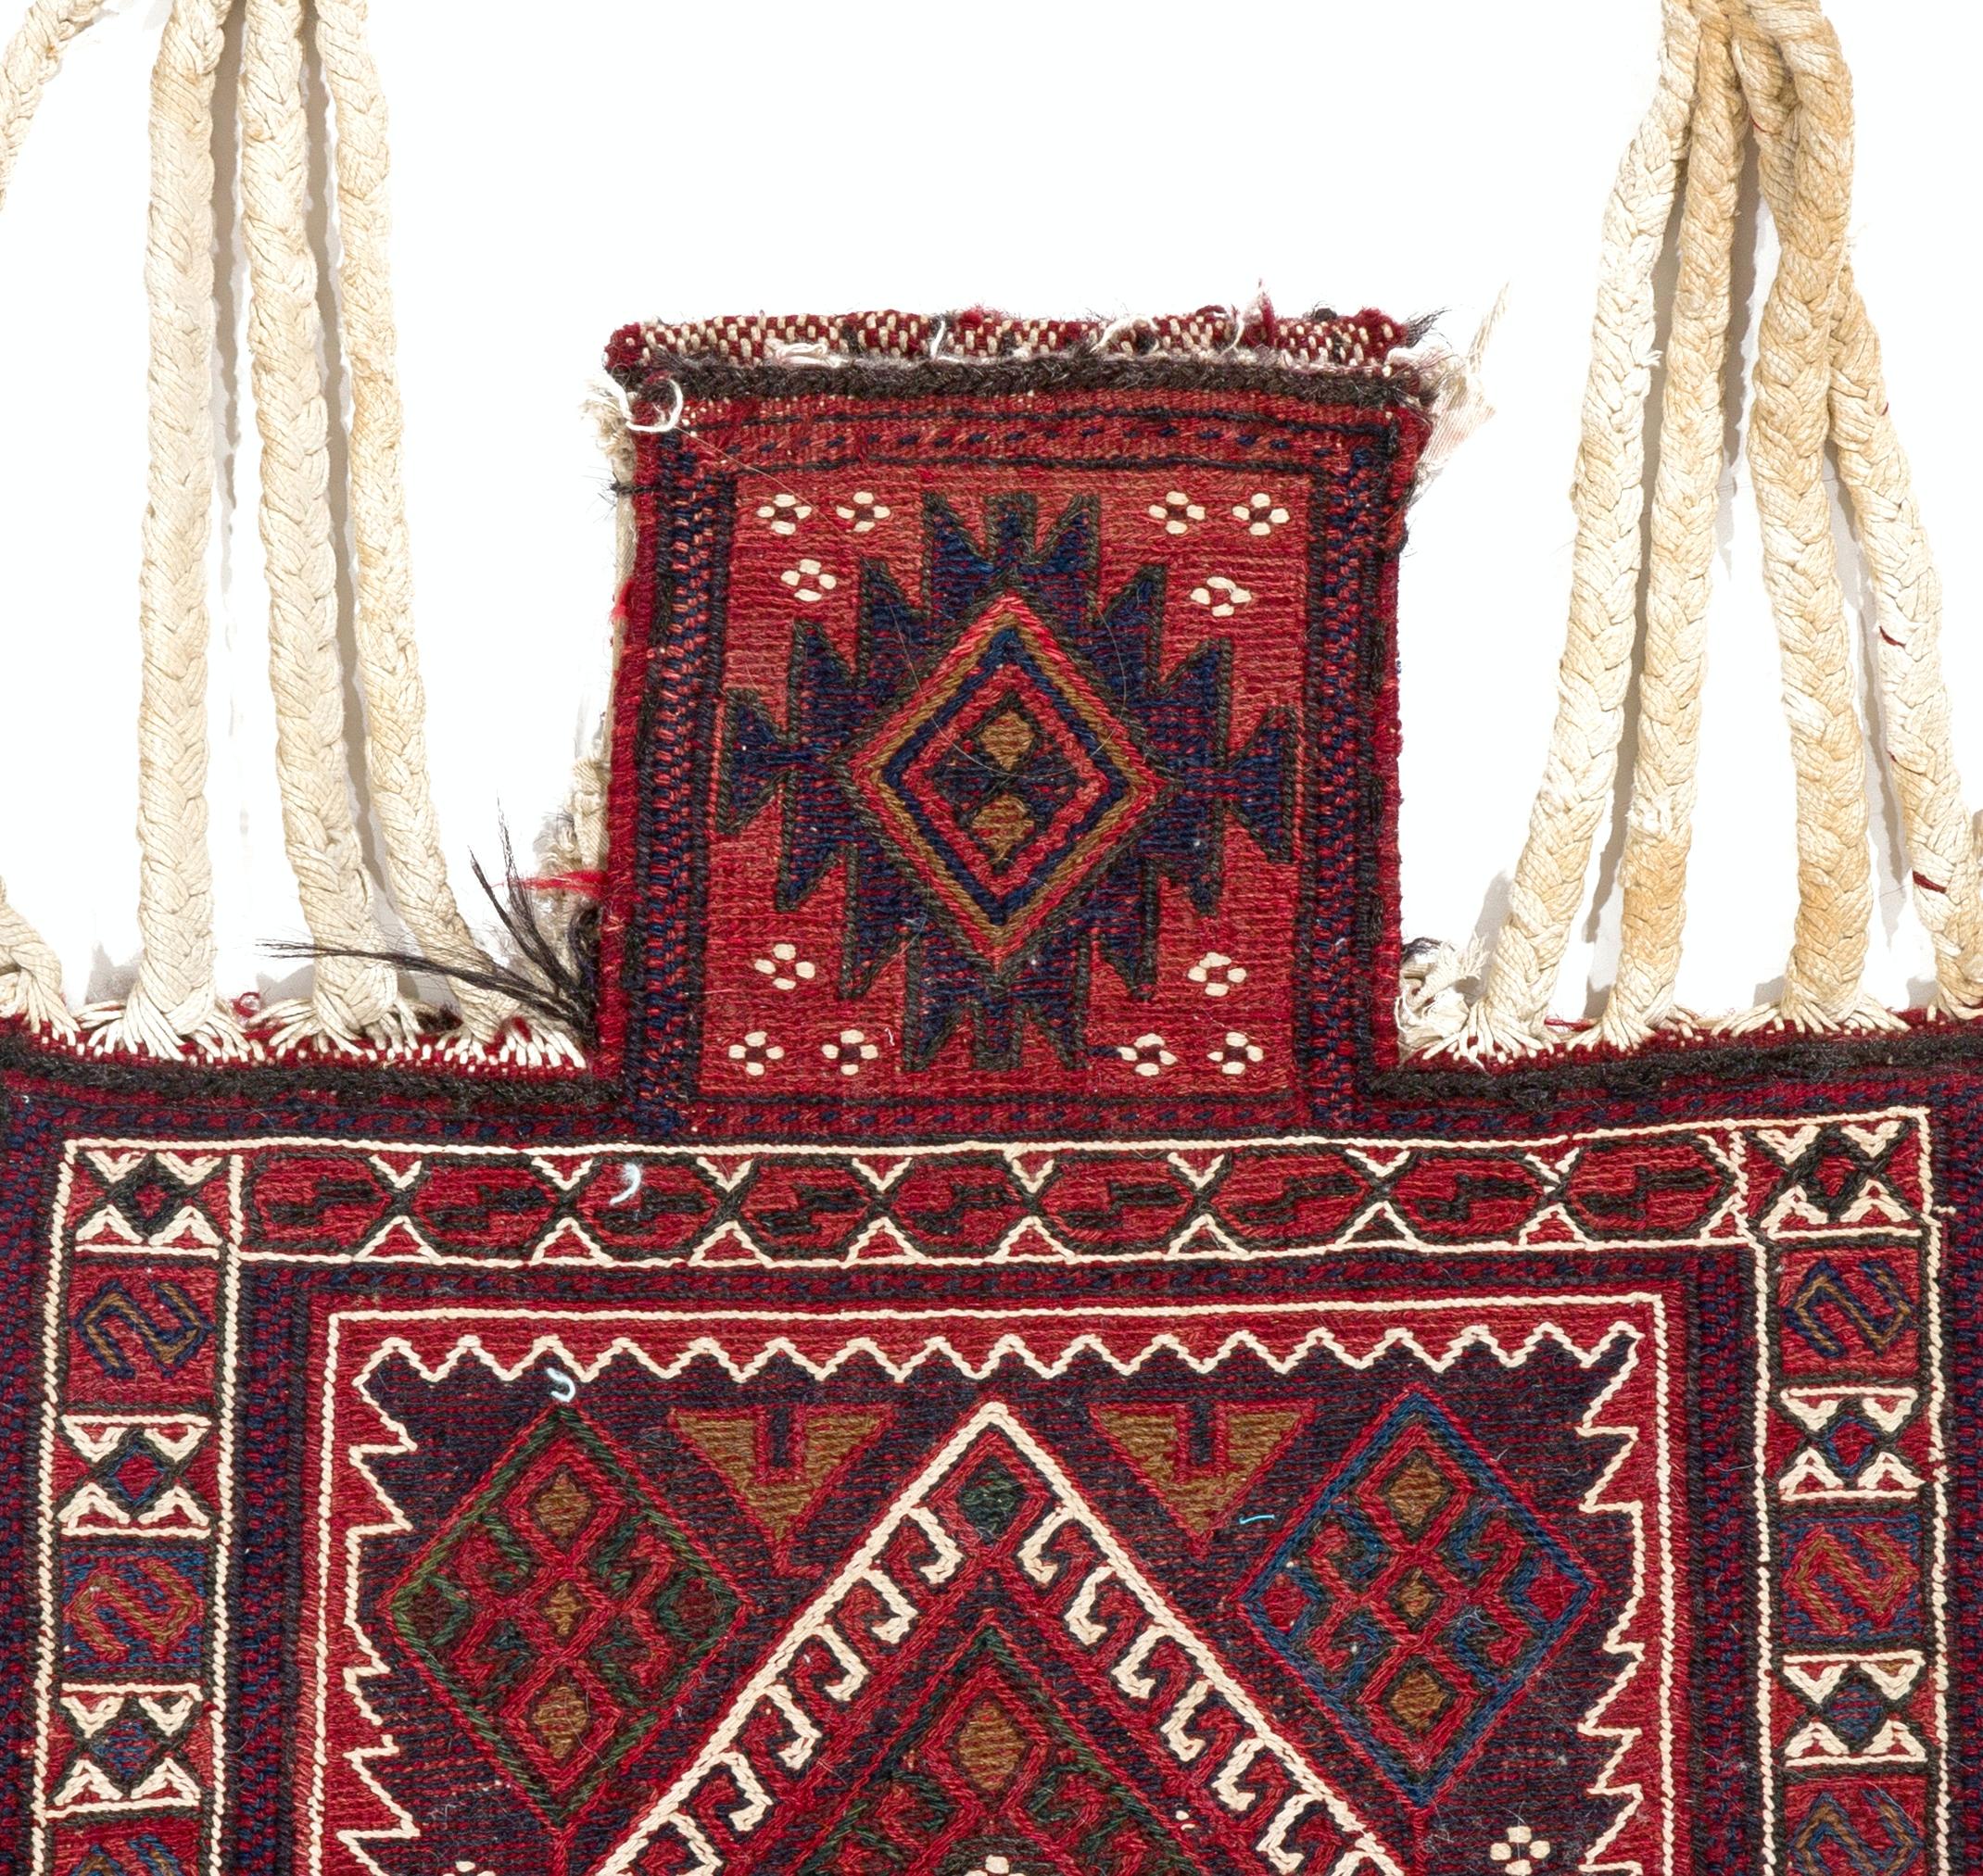 Hand-Knotted Rare Vintage Turkish Salt Bag. Decorative Handmade Wall Hanging in Red For Sale